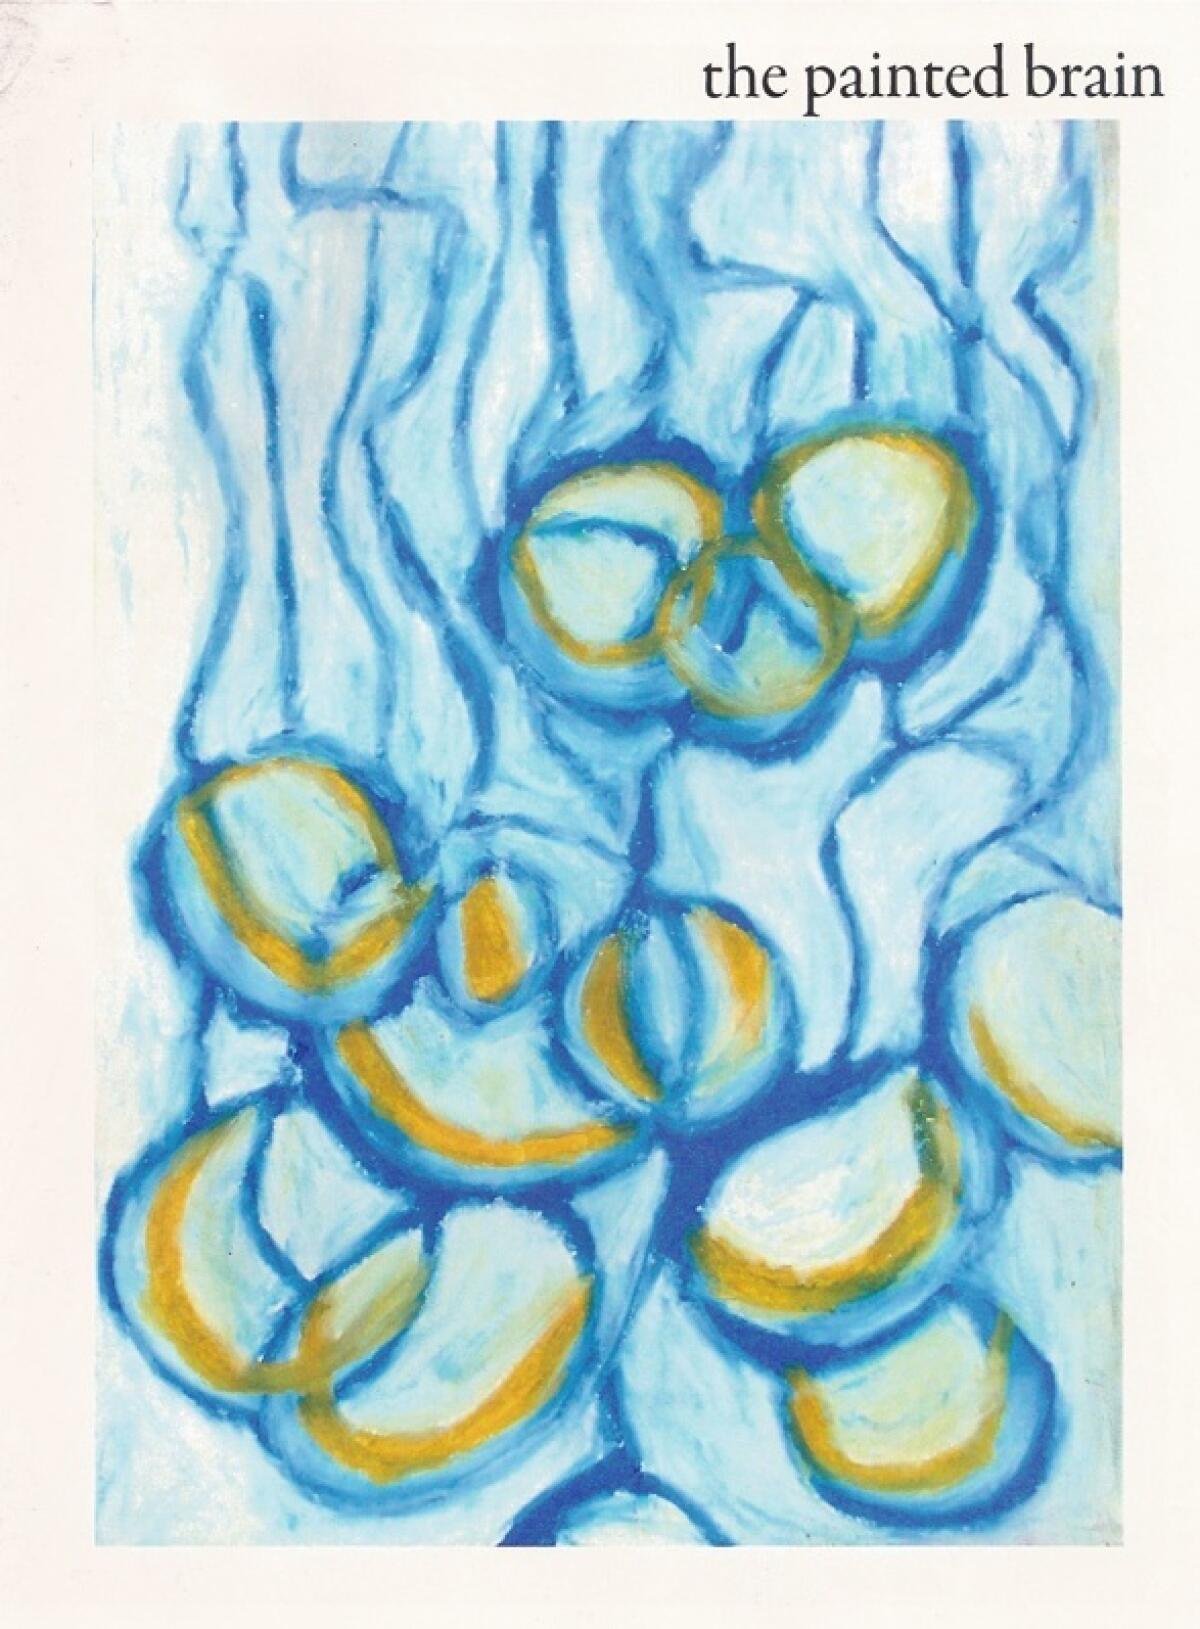 Painted Brain magazine cover, the art is of blue and yellow cells